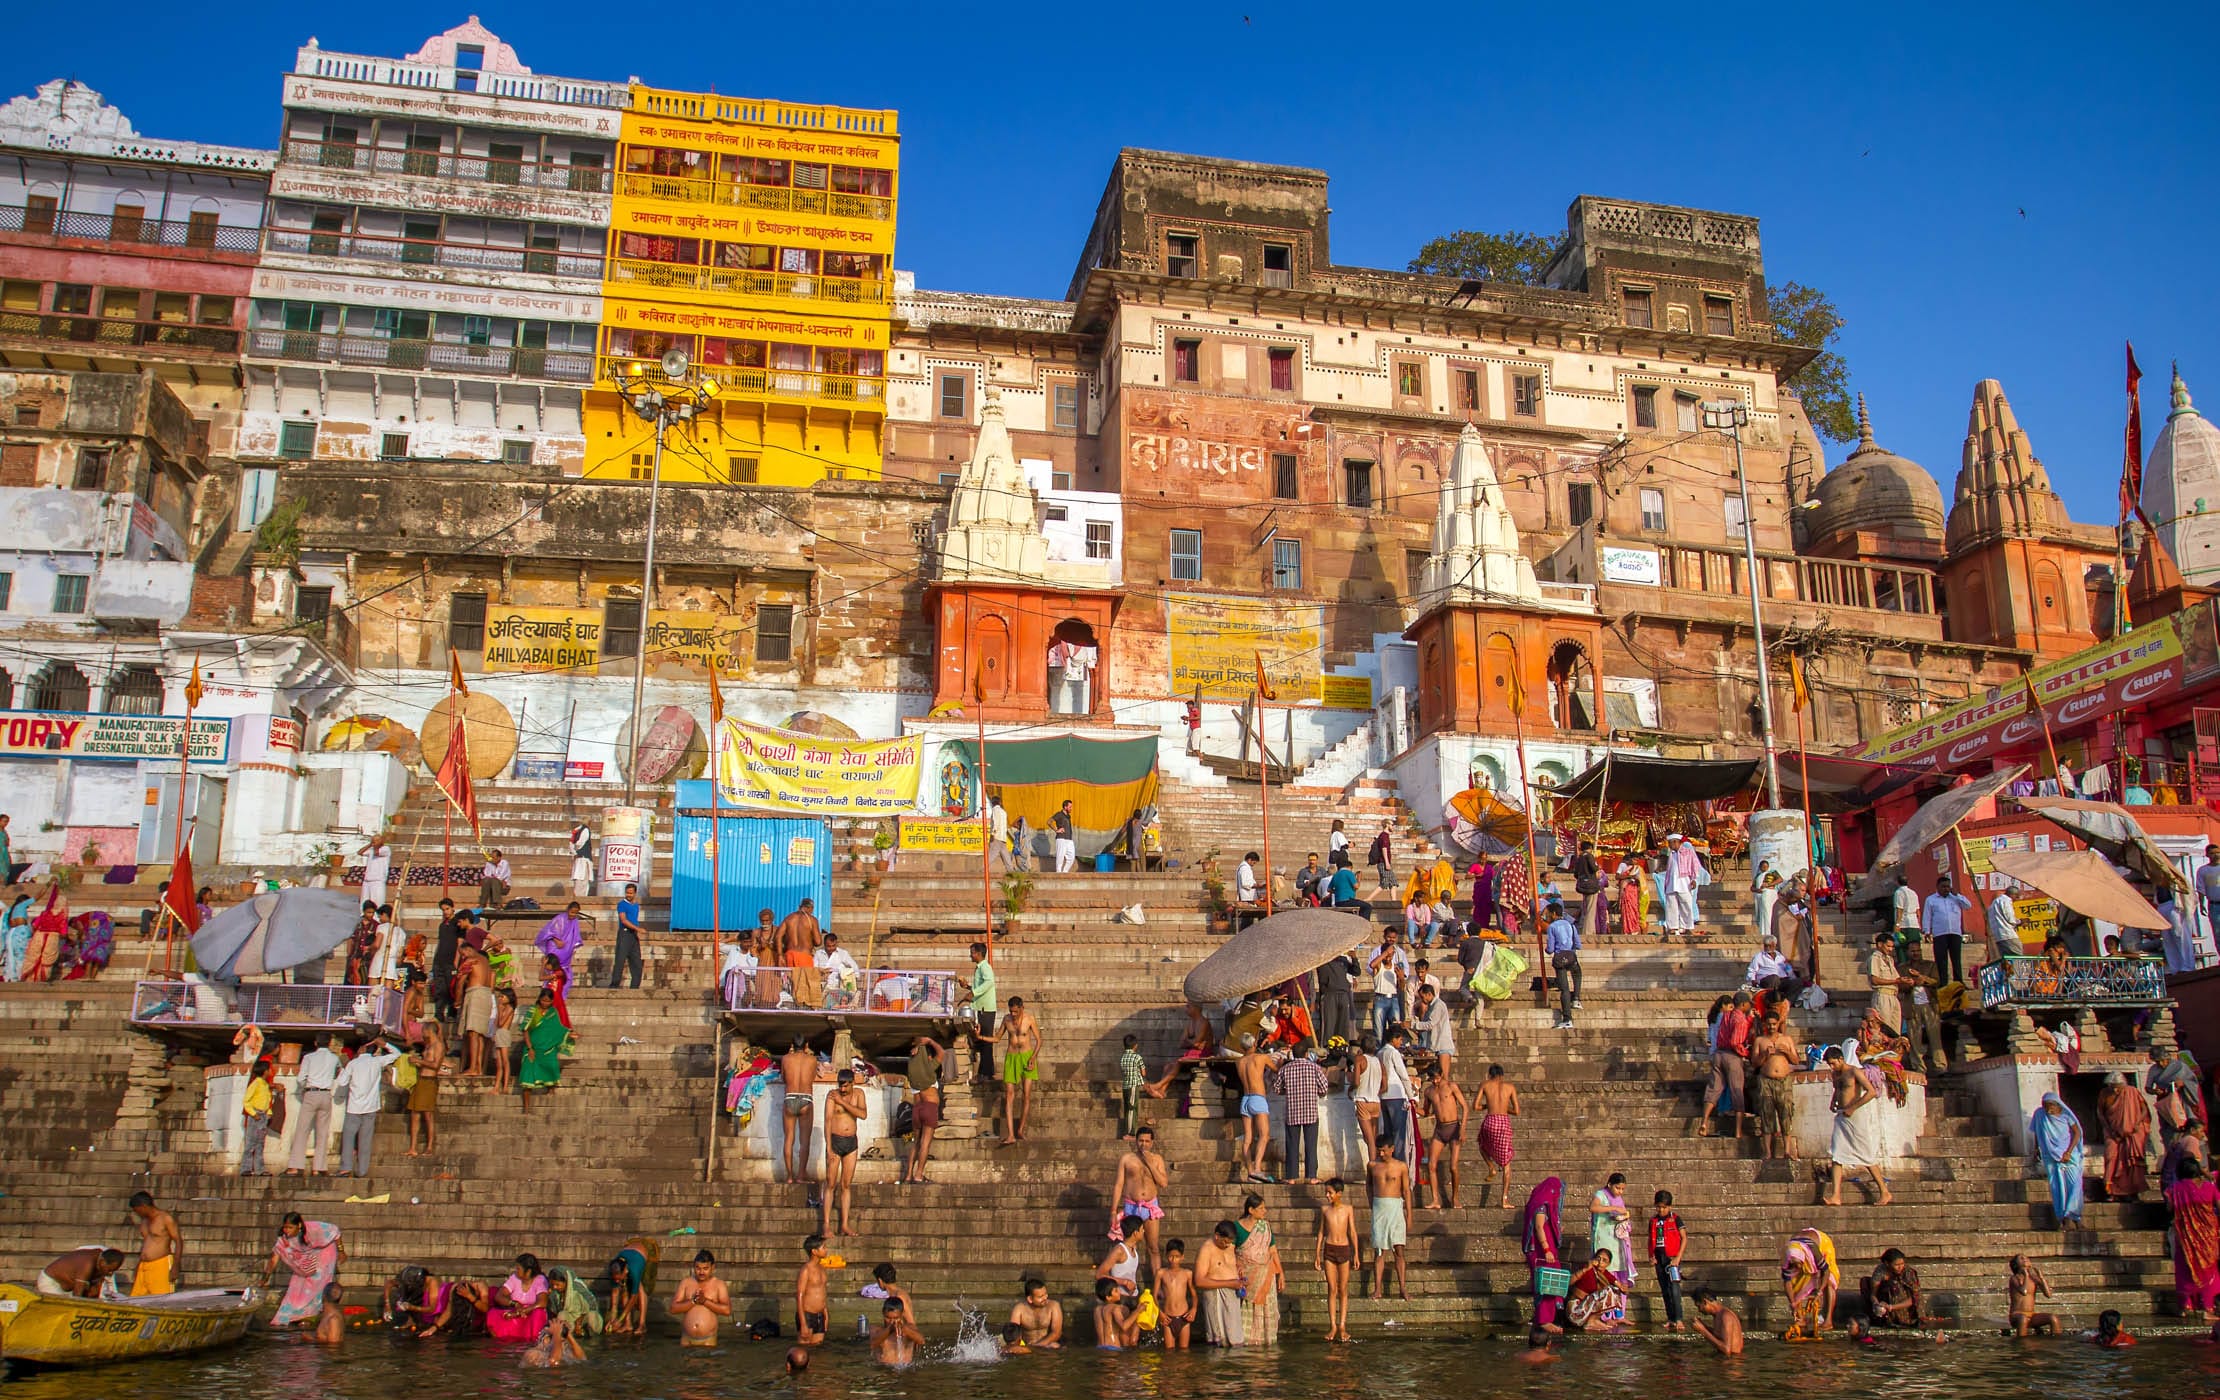 Varanasi is the oldest and the most sacred place for the Hindus